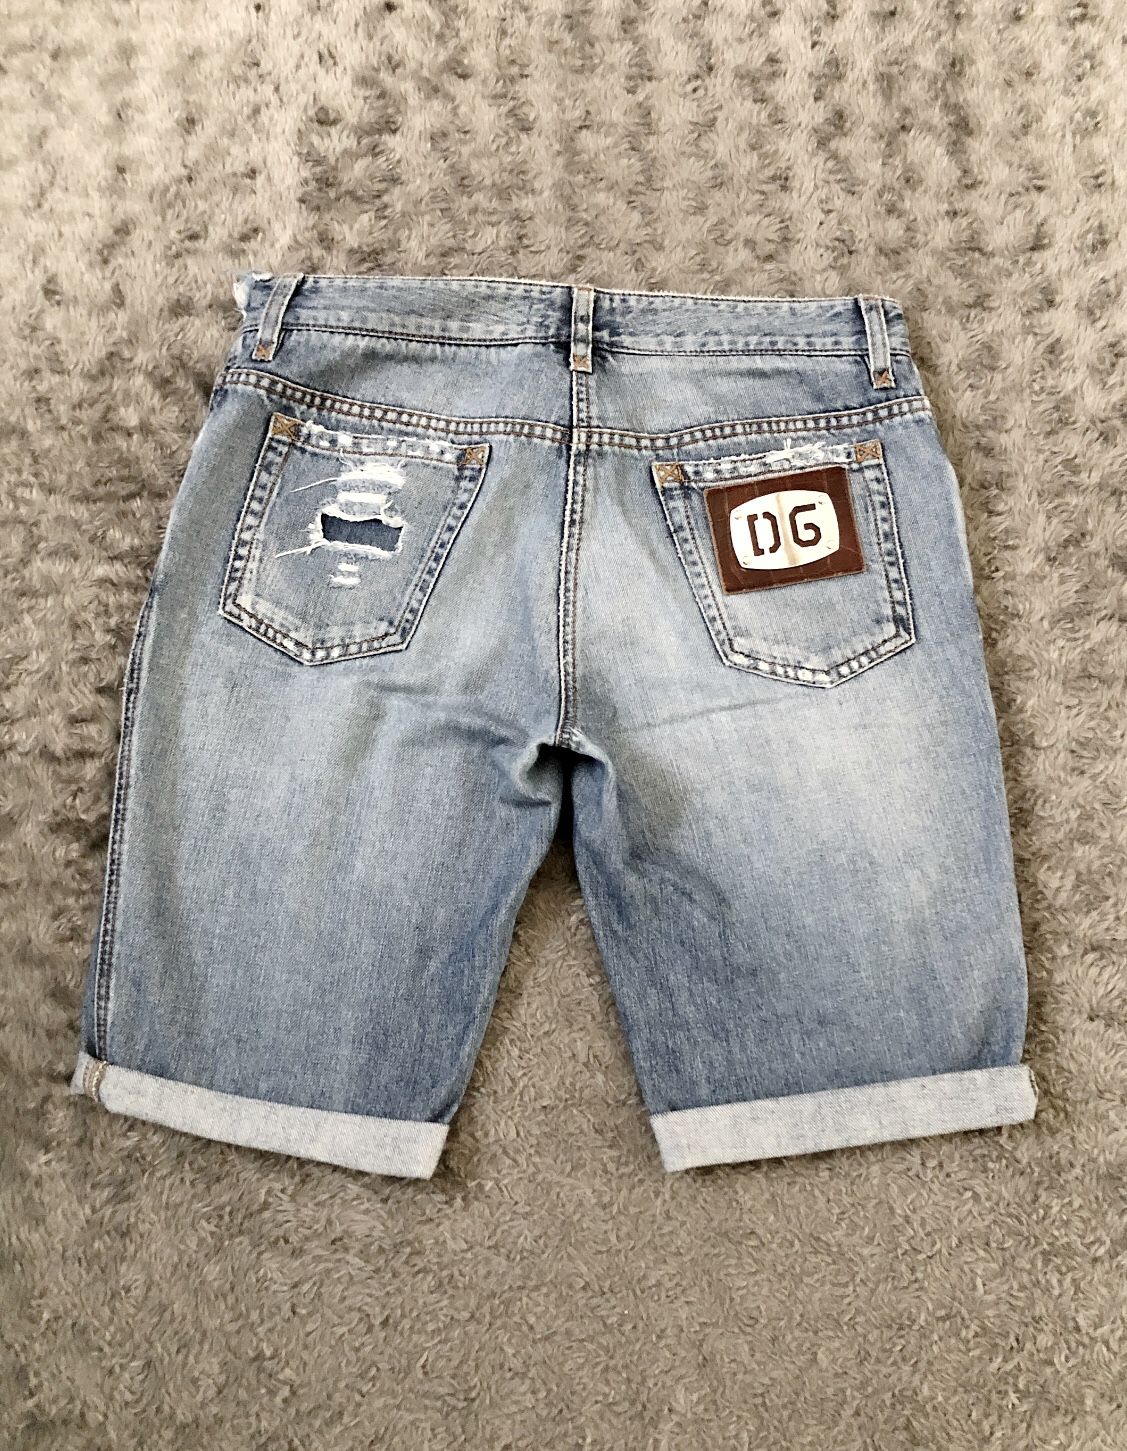 Women’s Dolce and Gabbana D&G vintage shorts size 42 retail $680 Good condition! Distressed, ripped, rolled up, washed with Metal D&G logo on back po